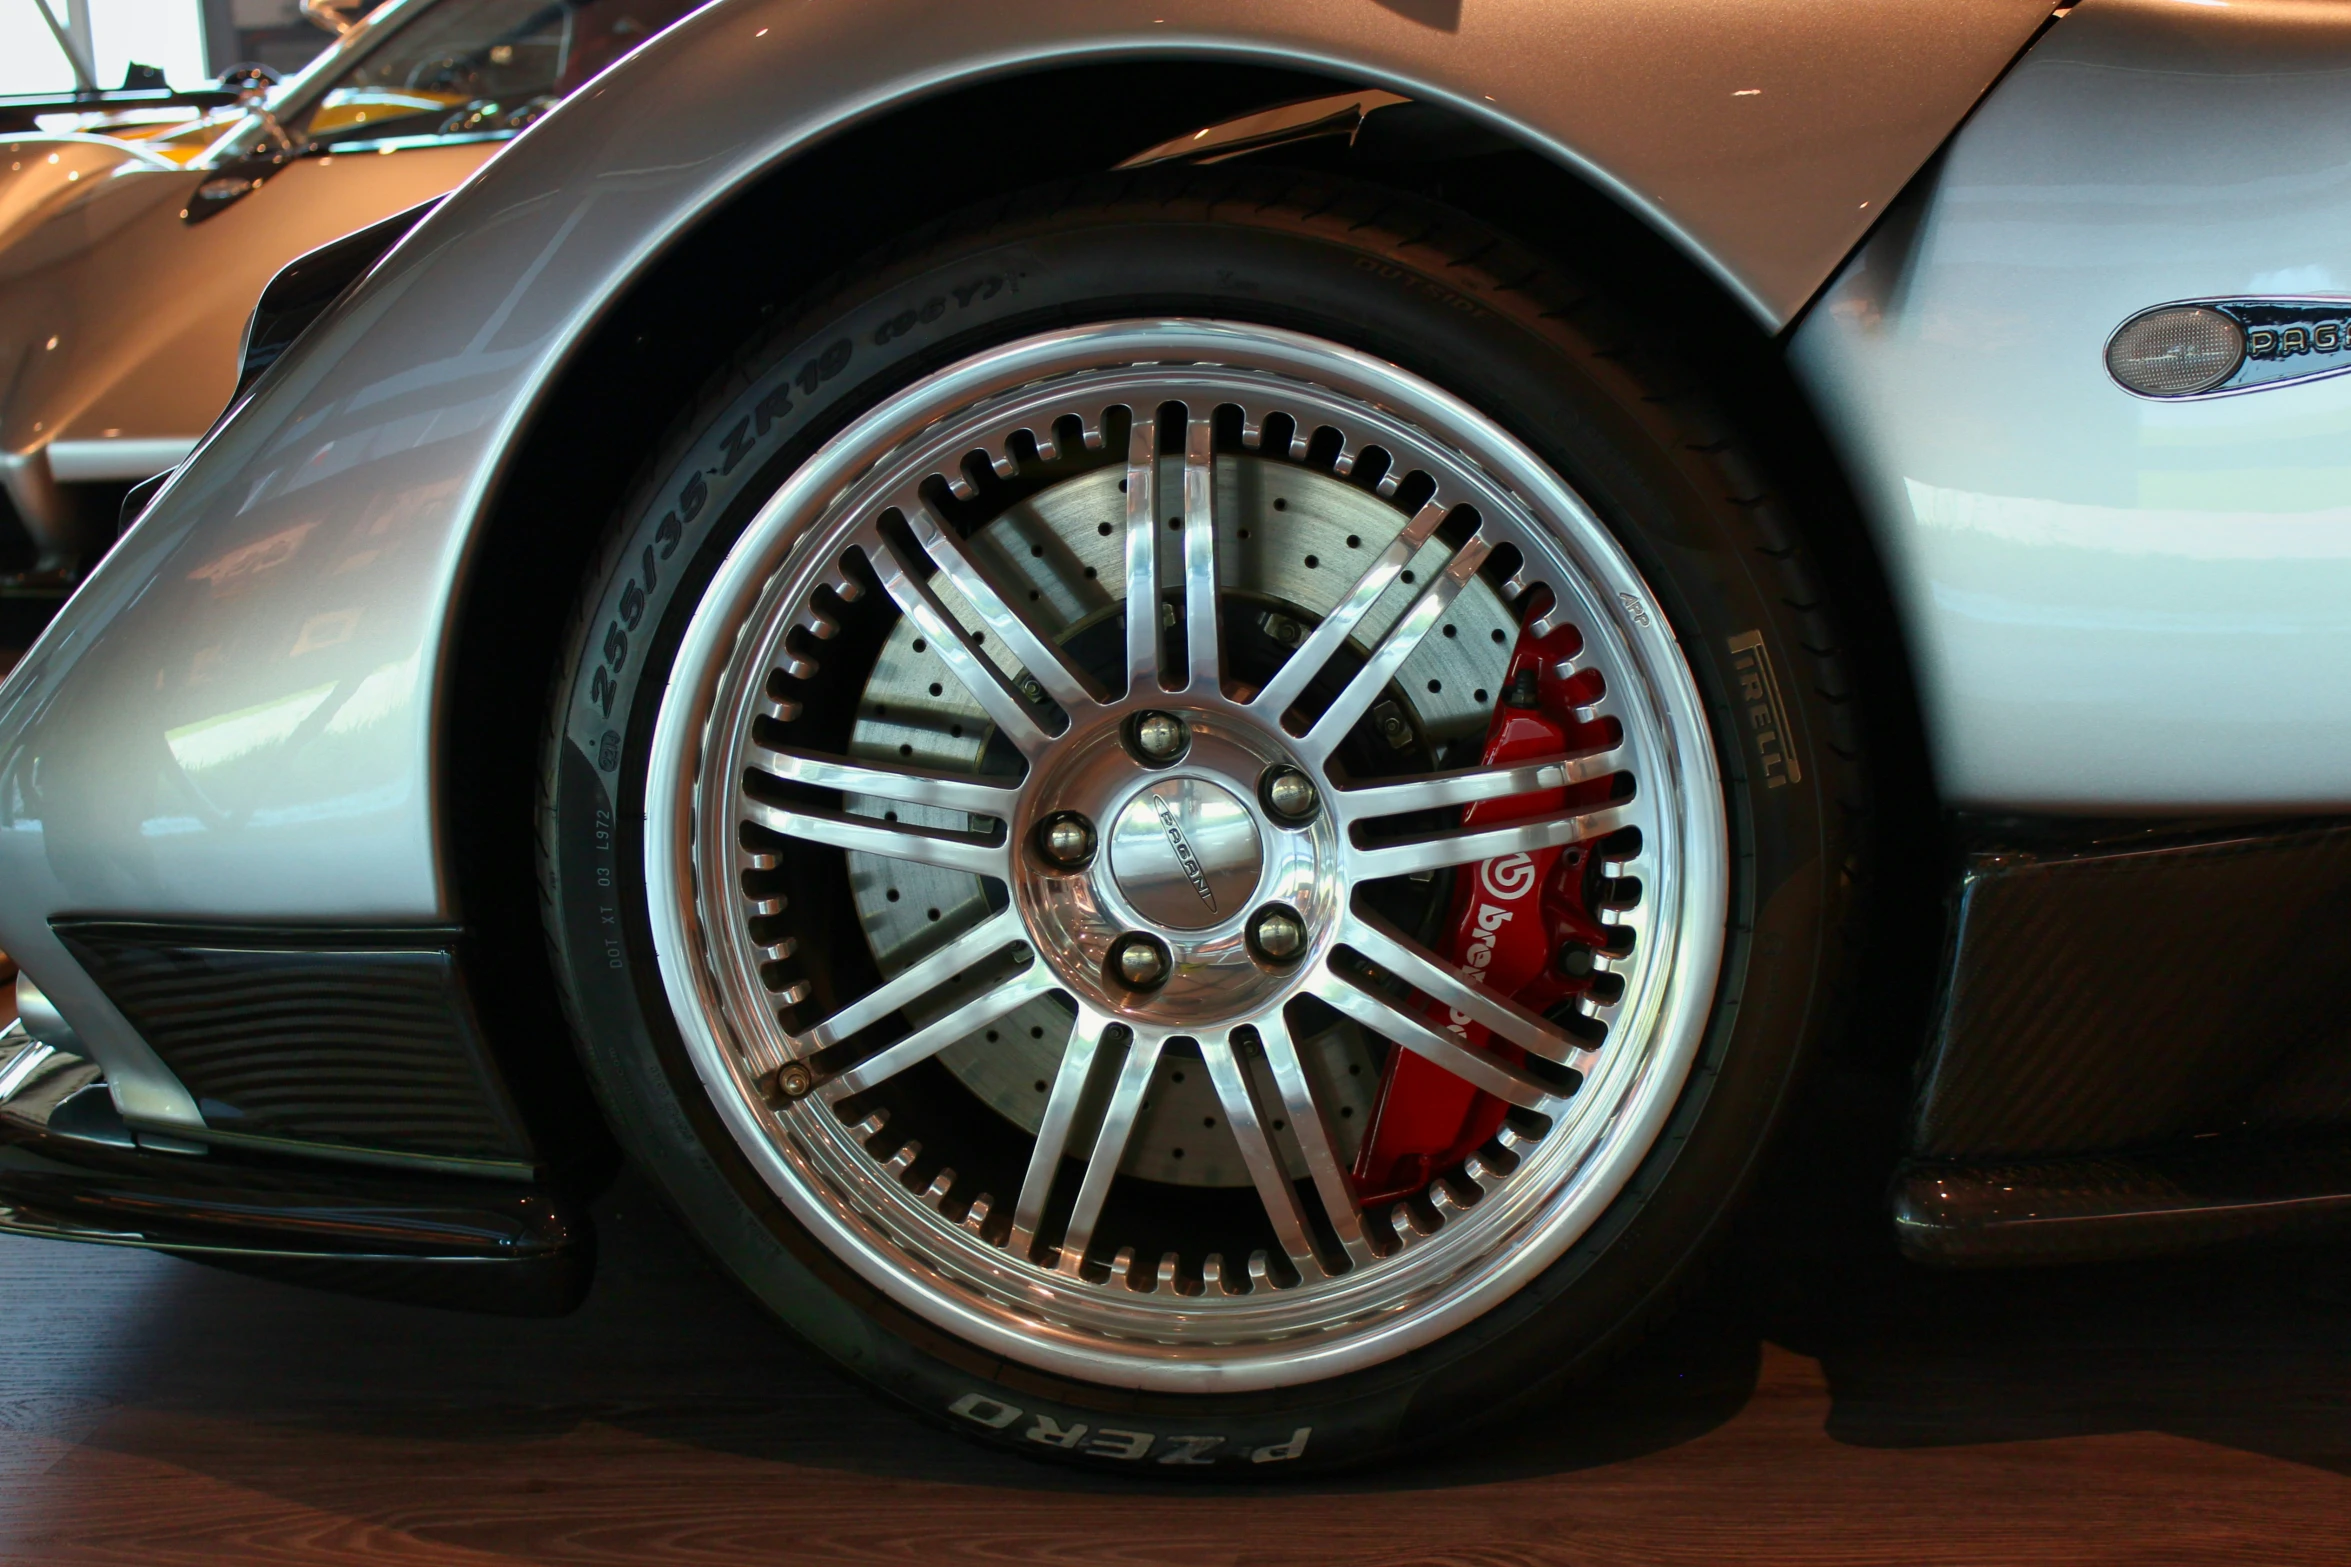 the front tire of a sports car on display at a vehicle show